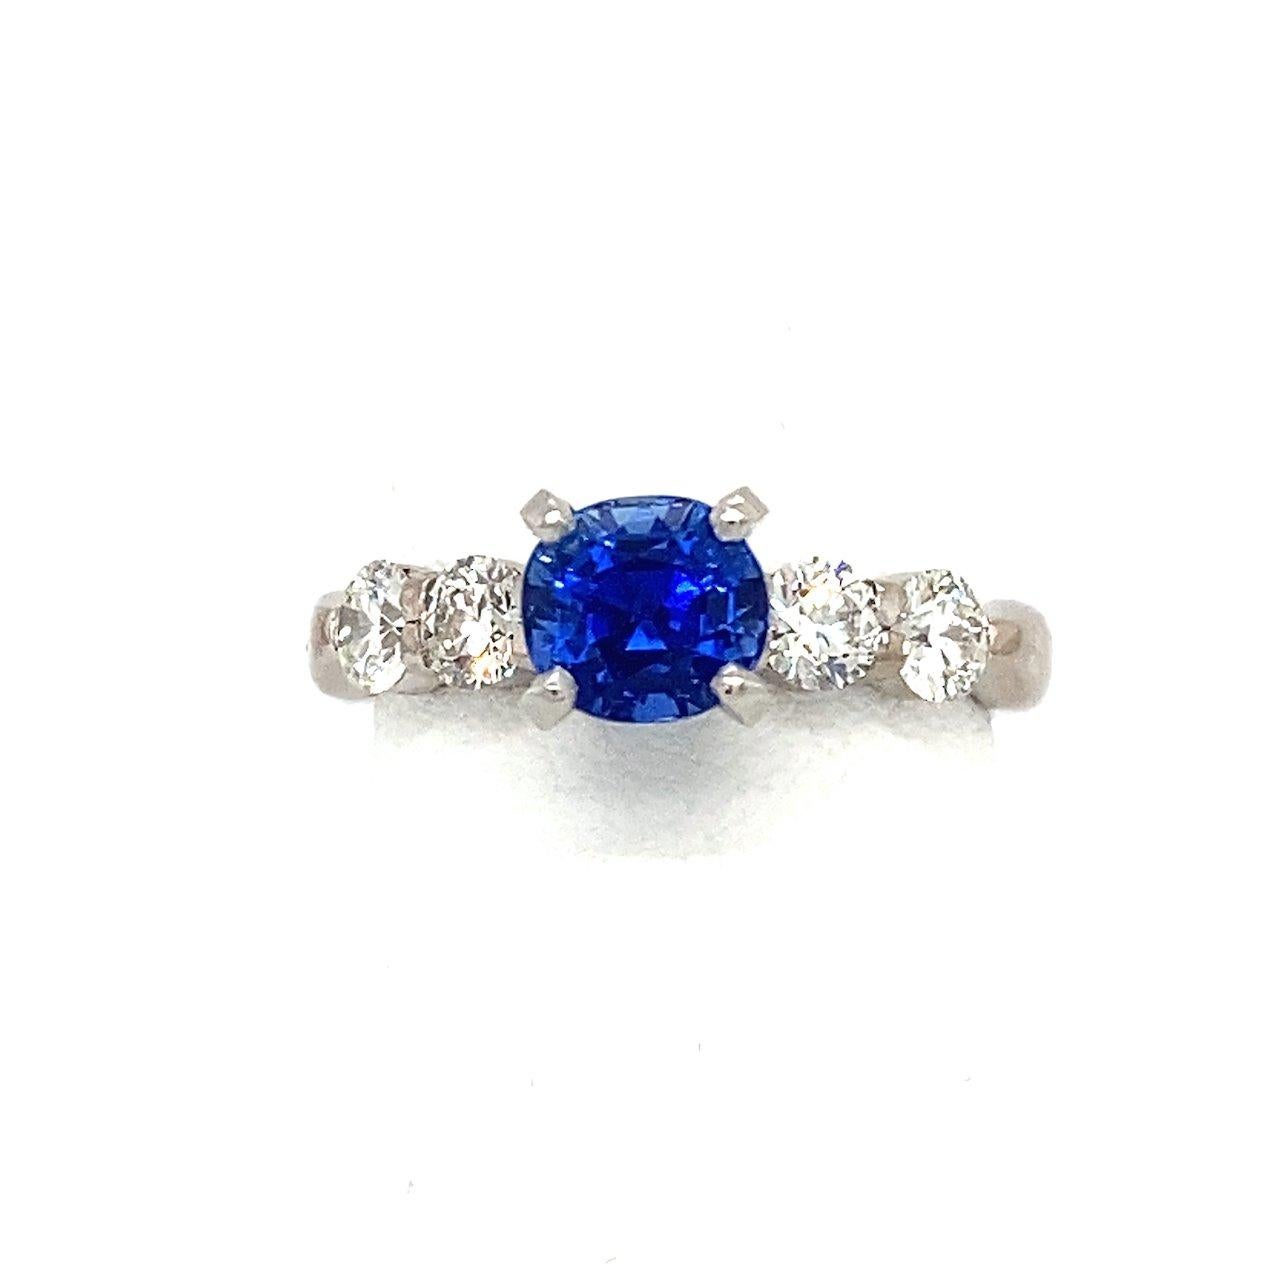 This ring features an untreated 1.4CT vivid blue Sri Lankan sapphire with a GIA certification. The sapphire is flanked by four round bright, sparkling diamonds that total approximately .64CT, F-G Color, VS Clarity. The sapphire and diamonds are set